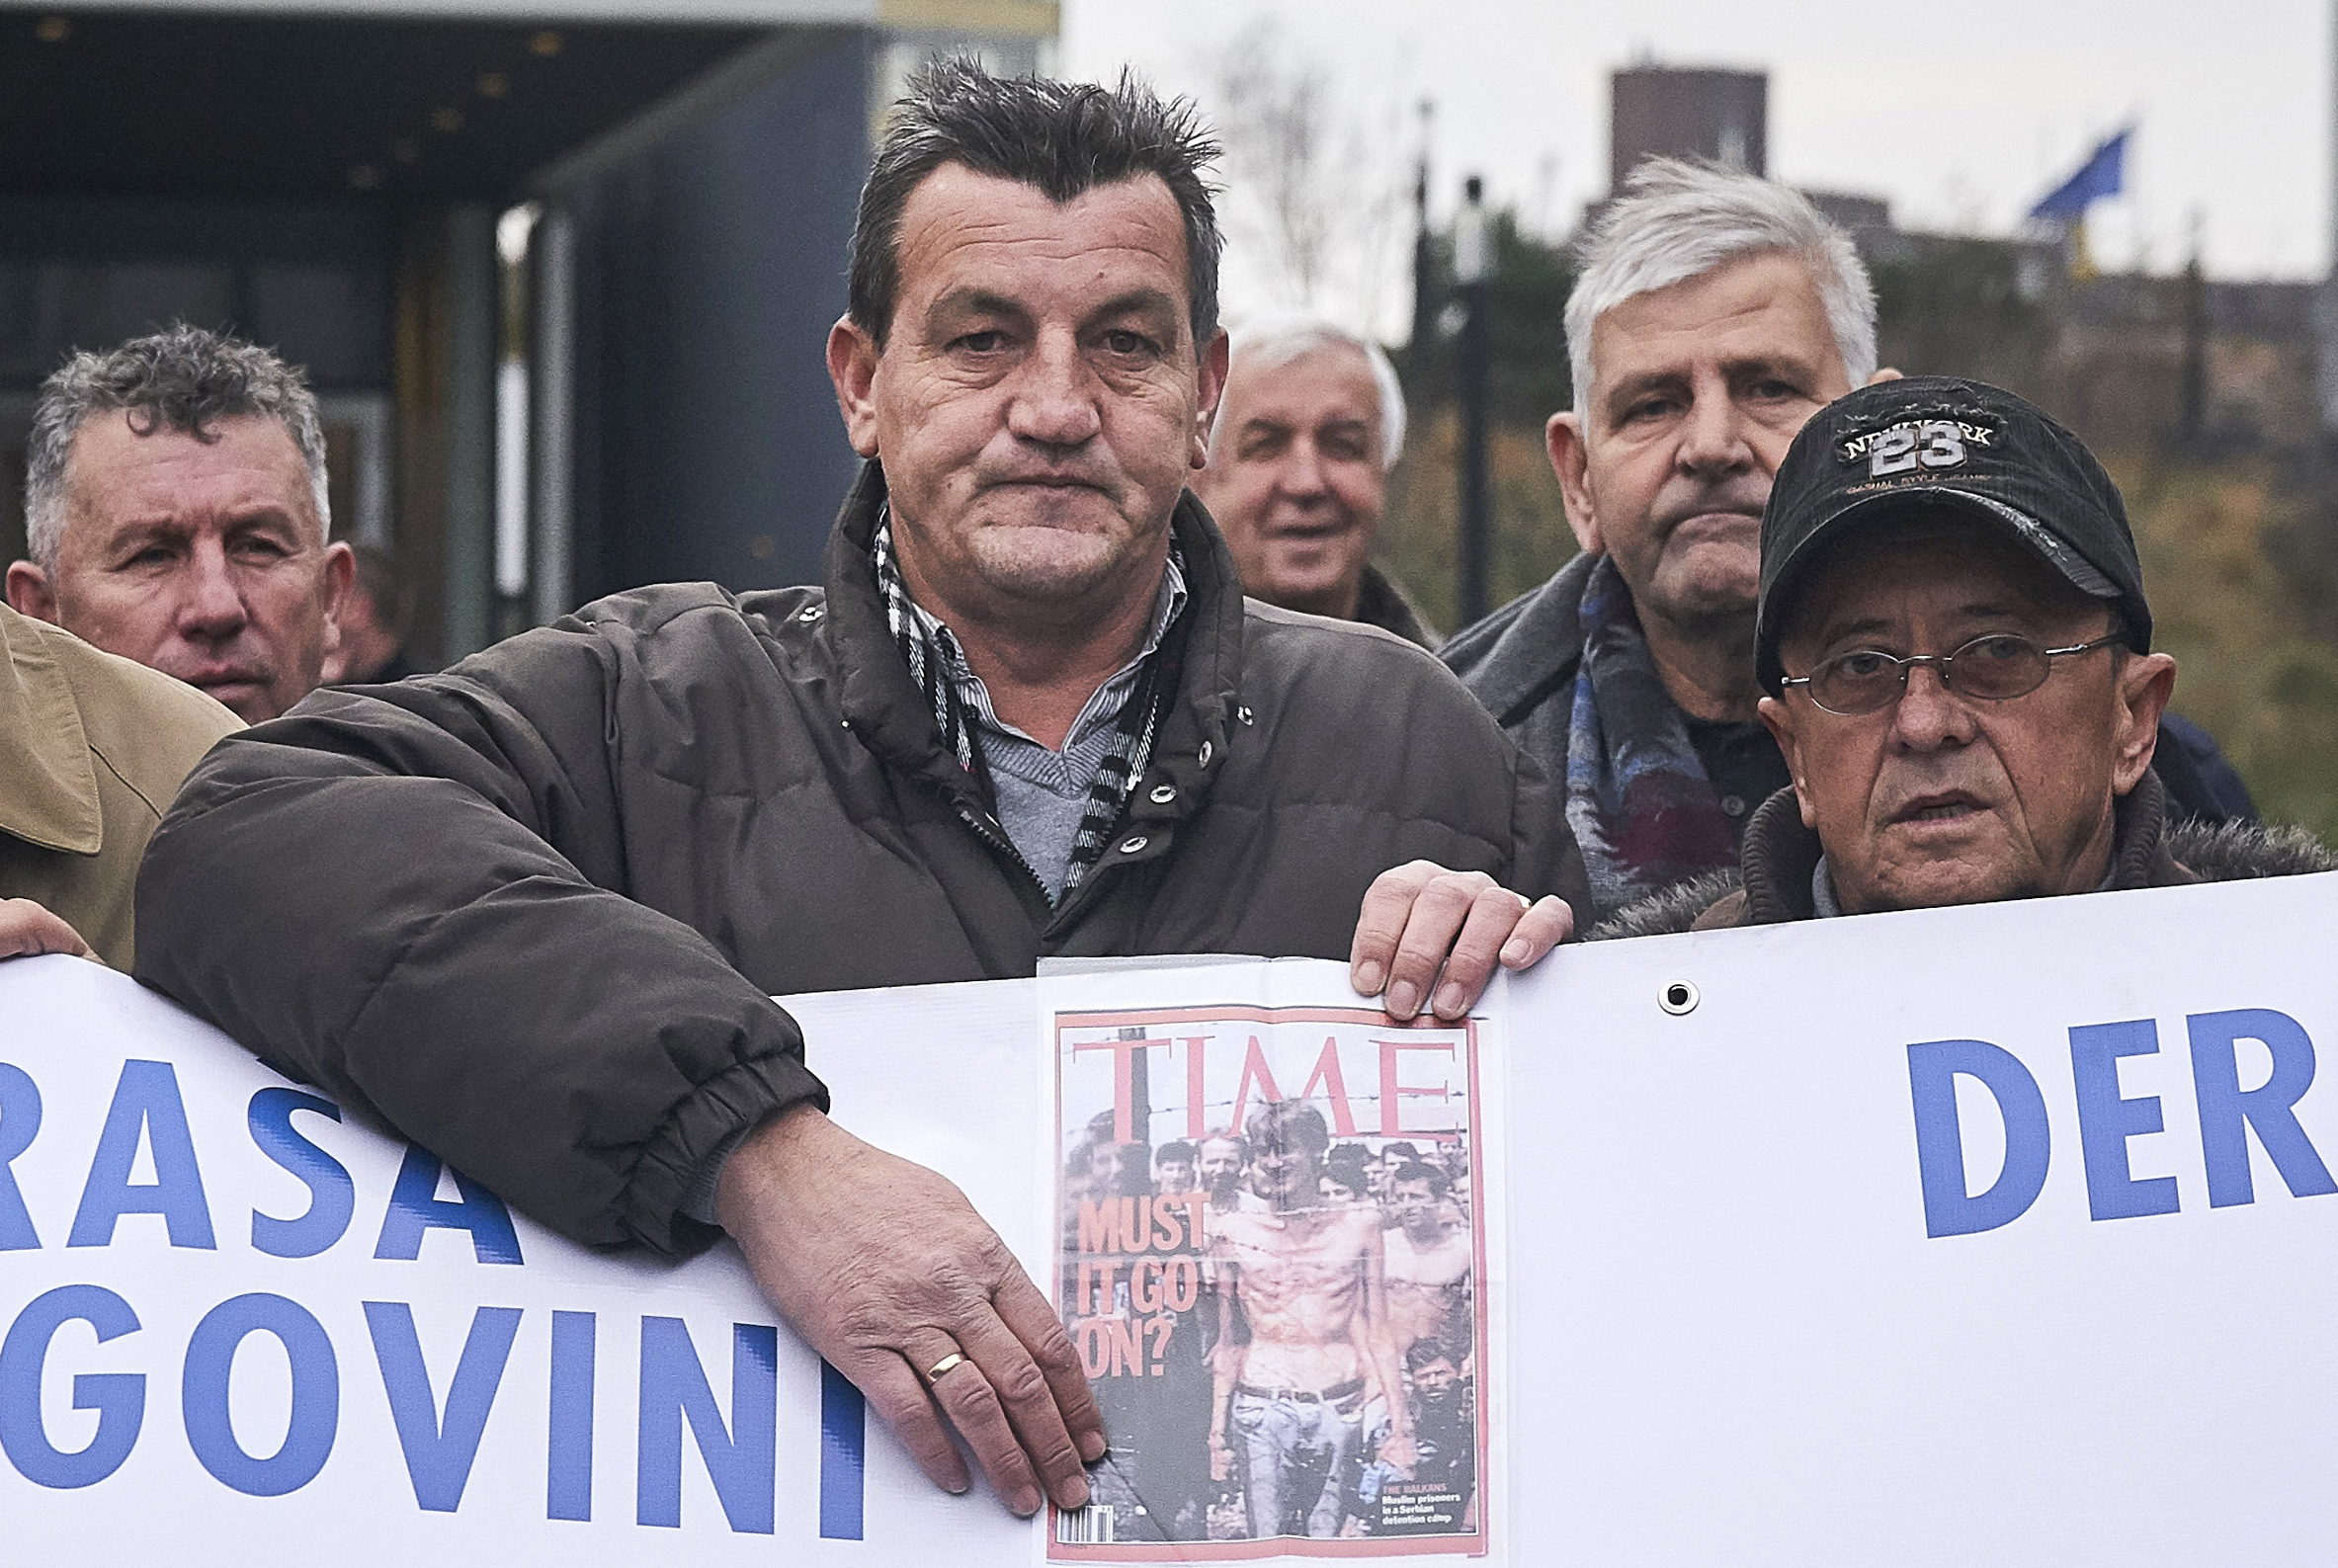 Fikret Alic, center, holds holds a copy of a magazine bearing his image, outside the Yugoslav War Crimes Tribunal, ICTY, as he waits for the verdict to be handed down in the genocide trial against former Bosnian Serb military chief Ratko Mladic, in The Hague, Netherlands, Wednesday Nov. 22, 2017. Alic, a Bosnian man who became a figurehead for the suffering of Bosnians during the war when he was photographed as an emaciated prisoner behind the wire of a Bosnian Serb prison camp, was among those waiting to watch the hearing. (AP Photo/Phil Nijhuis)